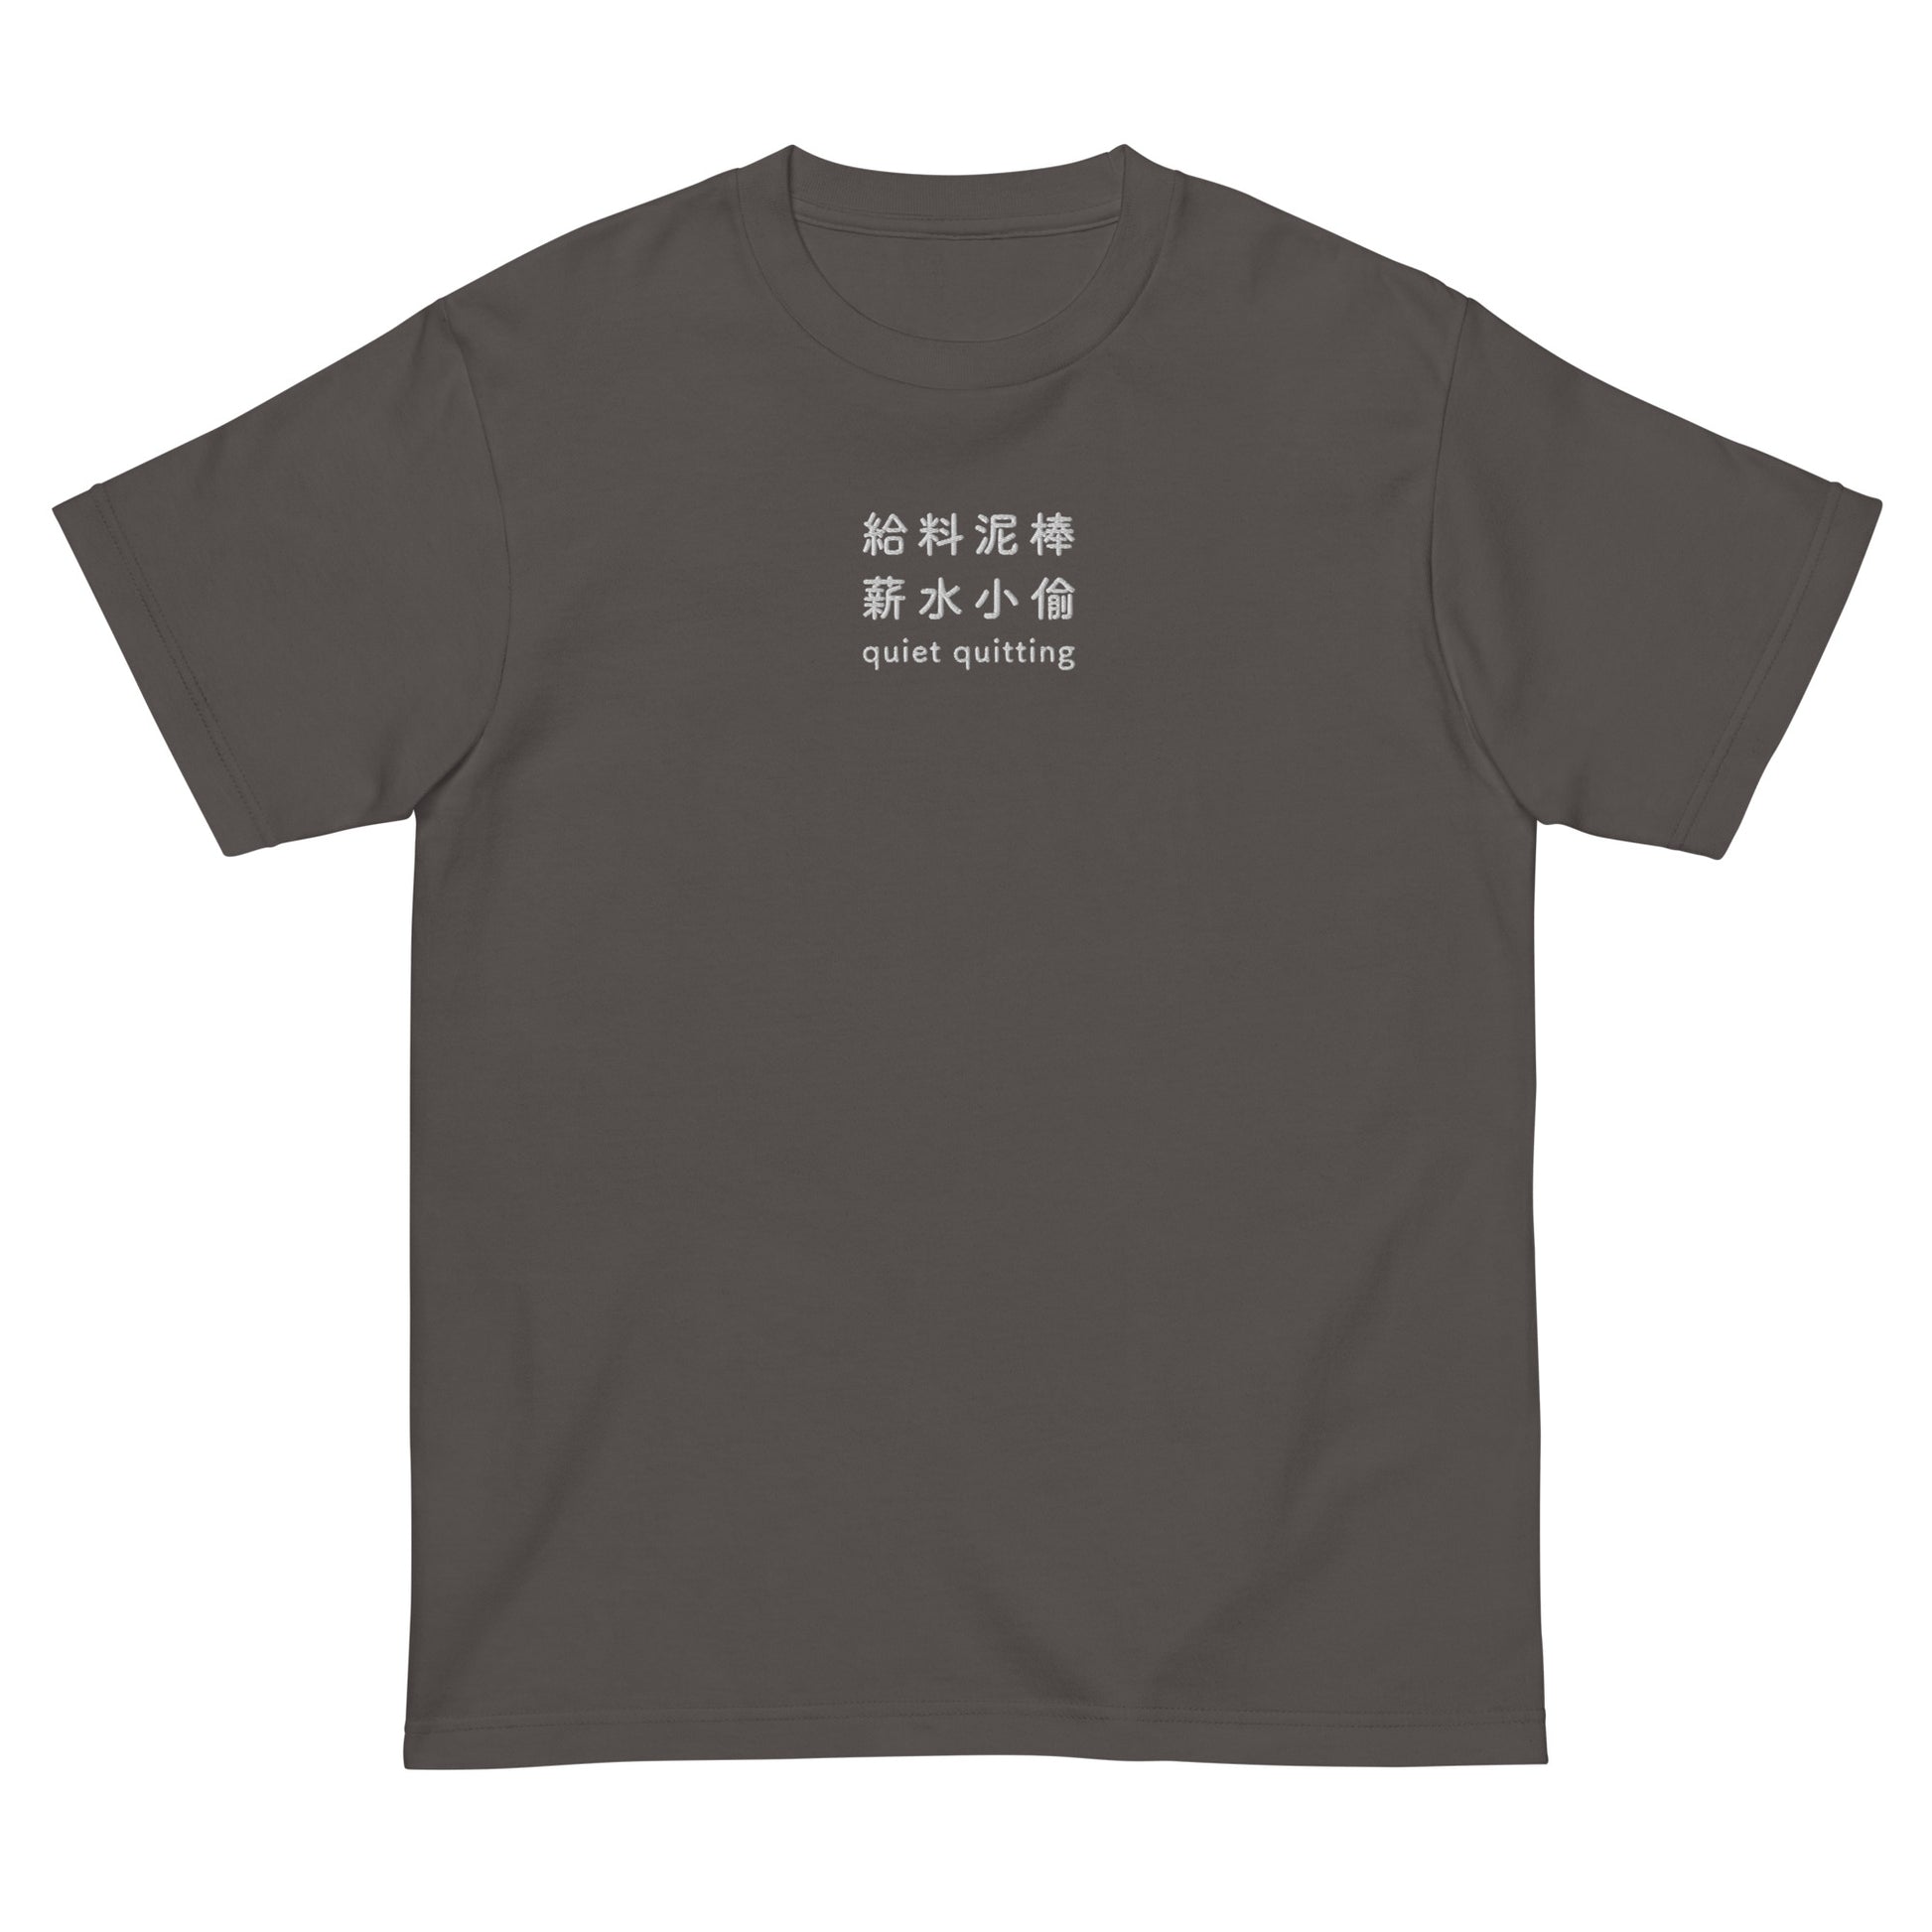 Dark Gray High Quality Tee - Front Design with an White Embroidery "Quiet Quitting" in Japanese,Chinese and English